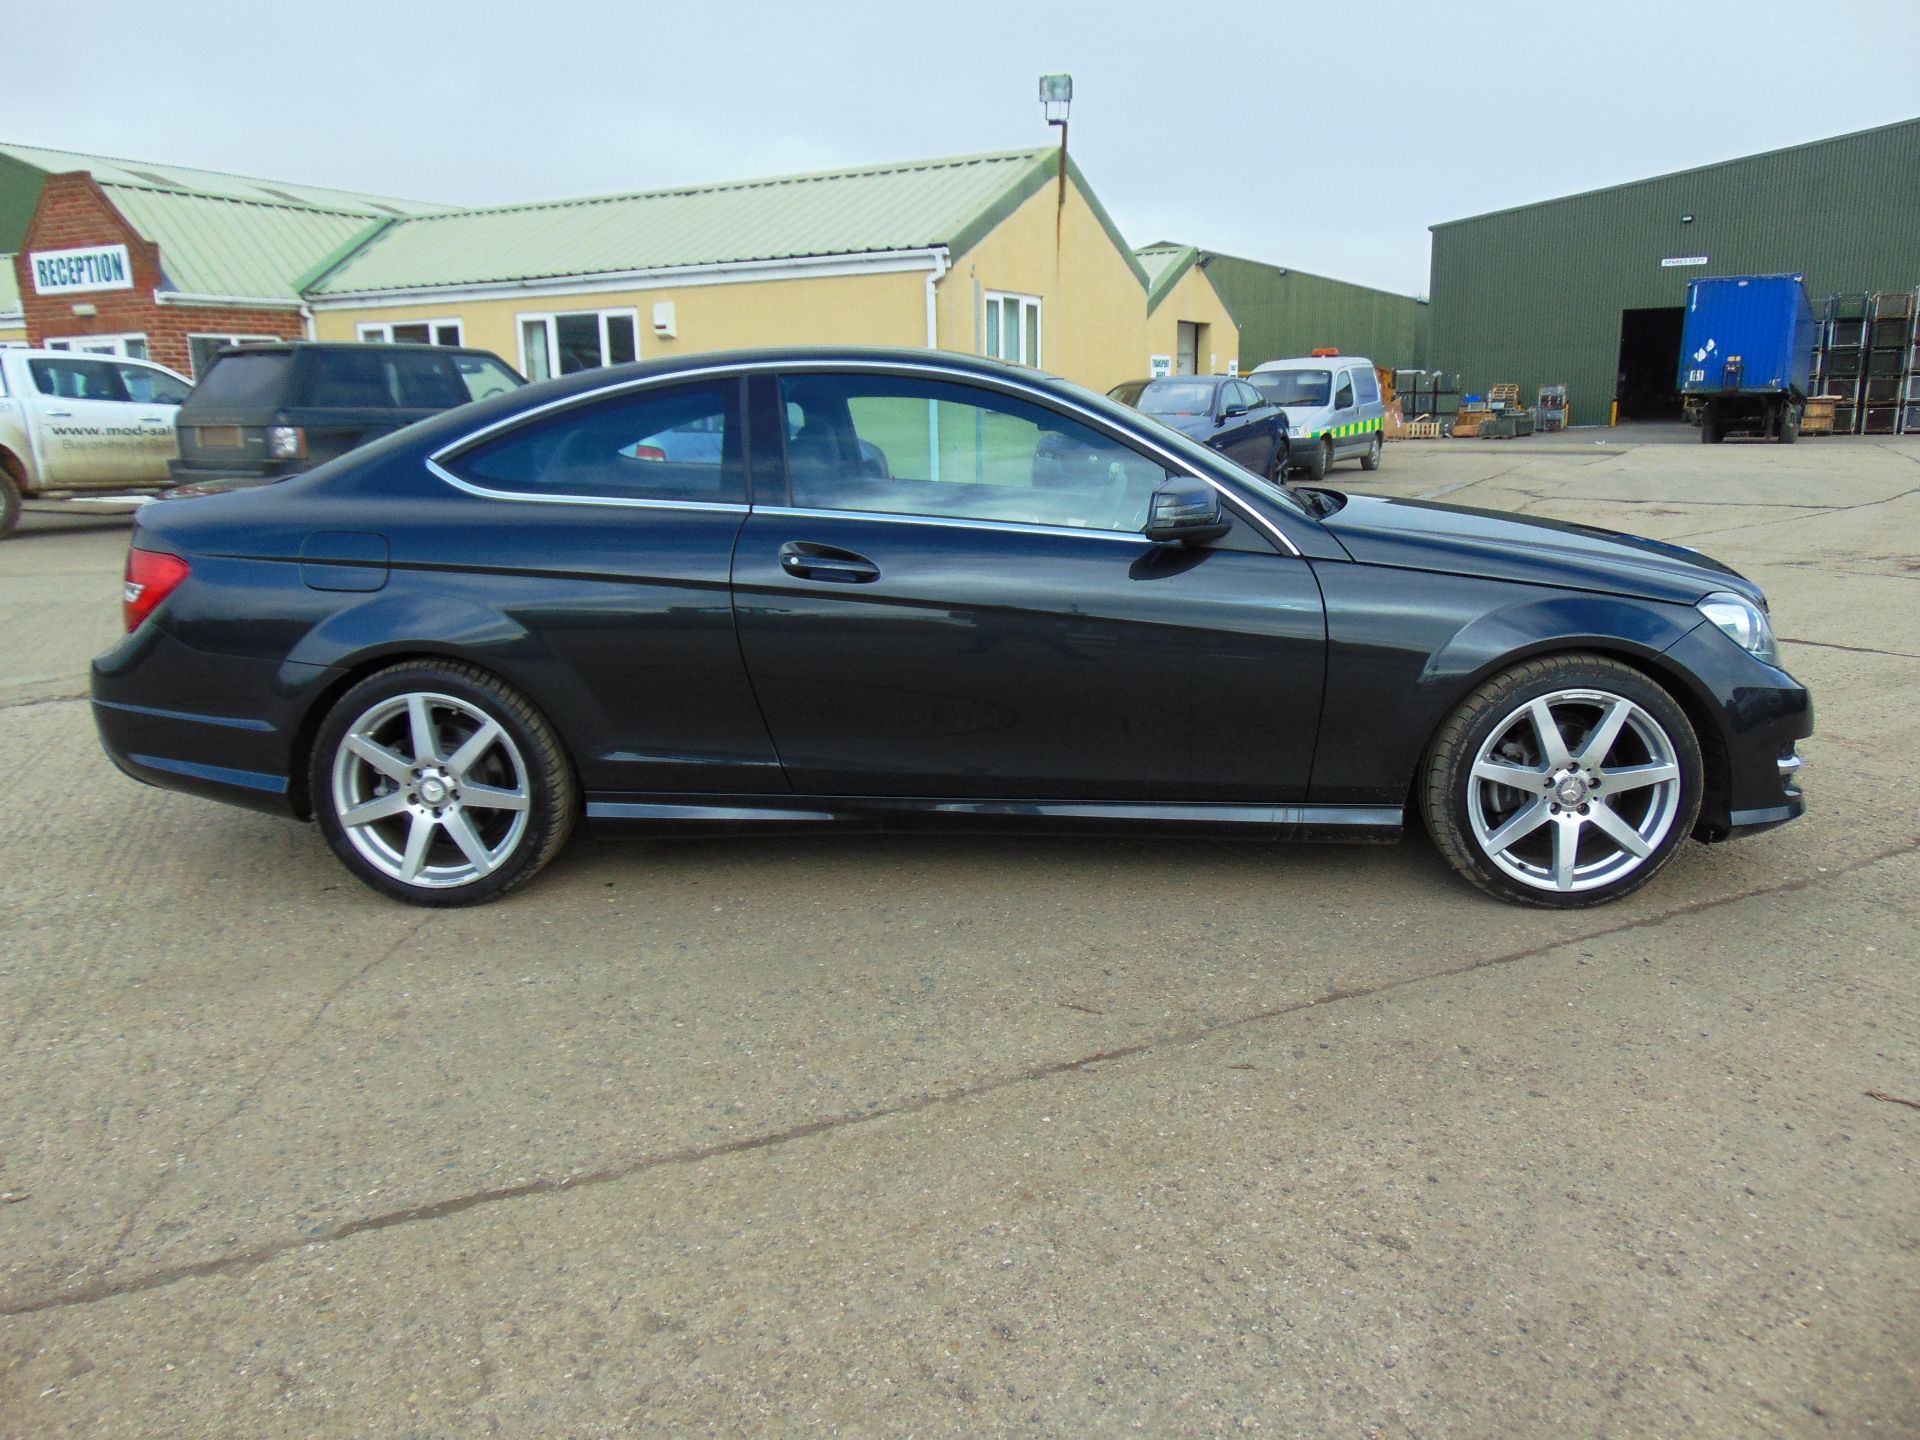 2012 Mercedes-Benz C Class 2.1 C250 CDI BlueEFFICIENCY AMG Sport 4dr Auto ONLY 7,860 miles!!! - Image 5 of 29